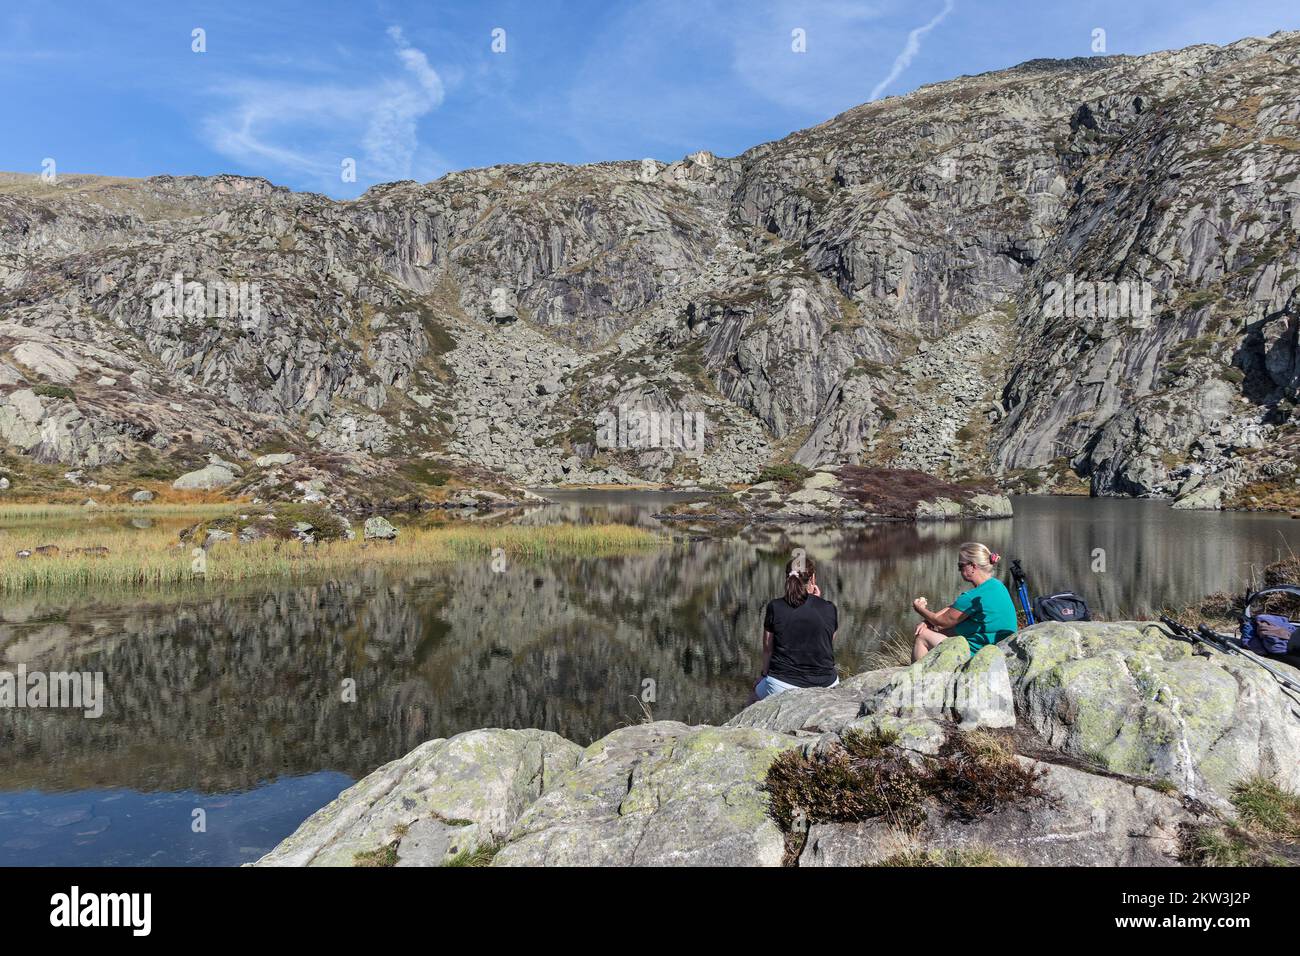 Two Walkers Take a Break at the Étang d'Arbu on the Ascent of the Pic des Trois Seigneurs, Ariège, Pyrenees, France, EU Stock Photo